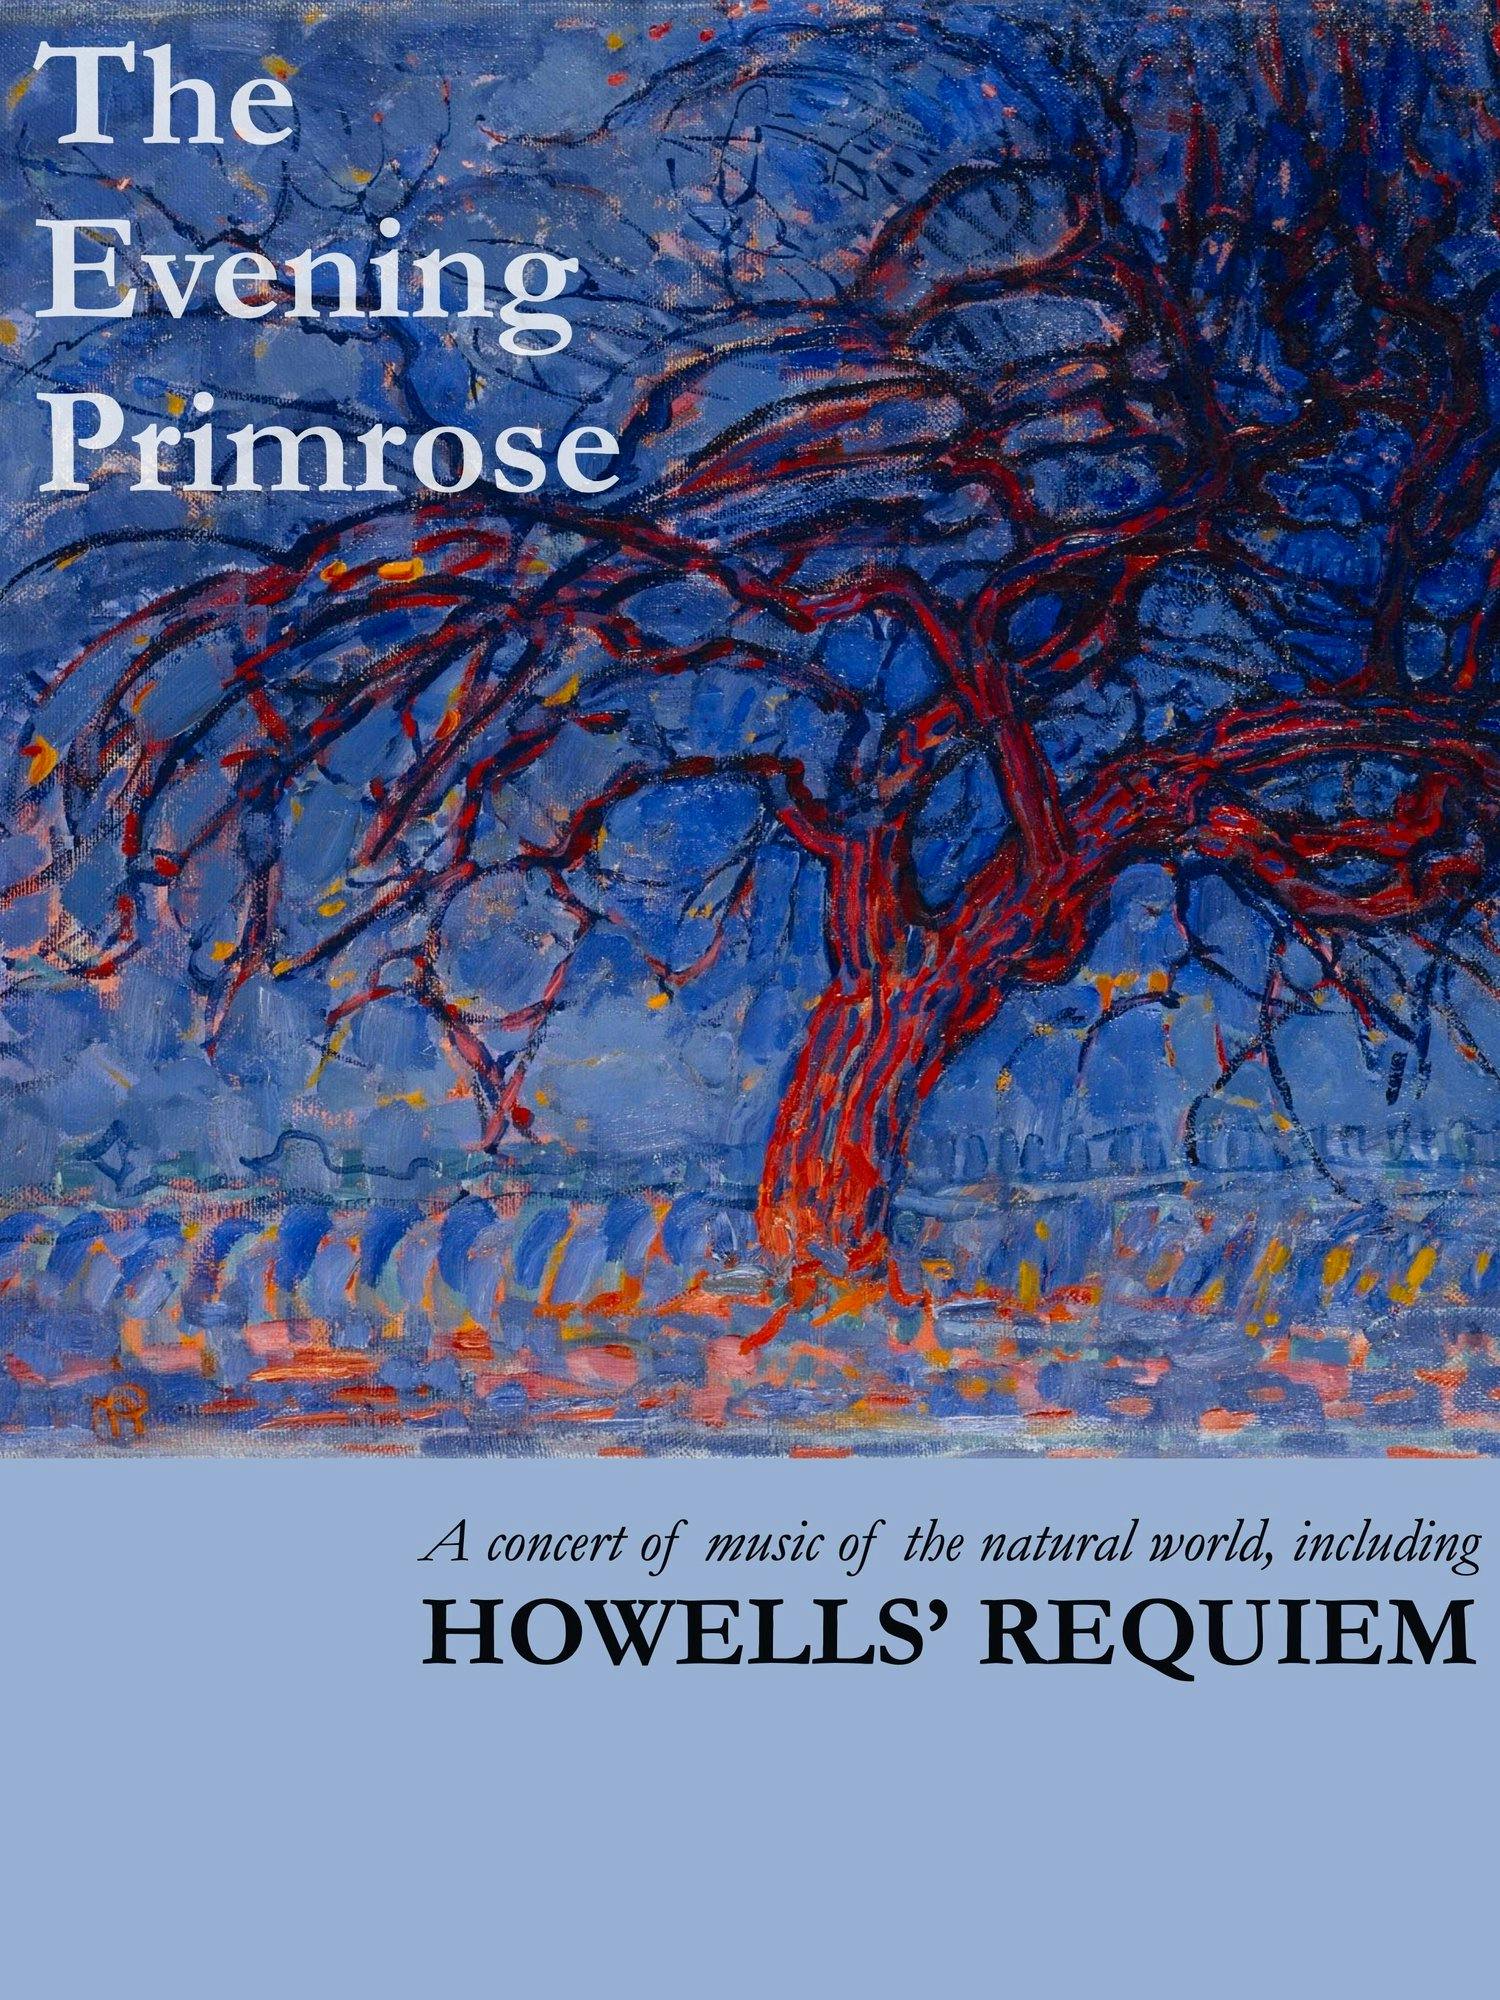 Poster for The Evening Primrose concert by Hesperos Choir. Featuring a painting of a red tree in impressionistic style